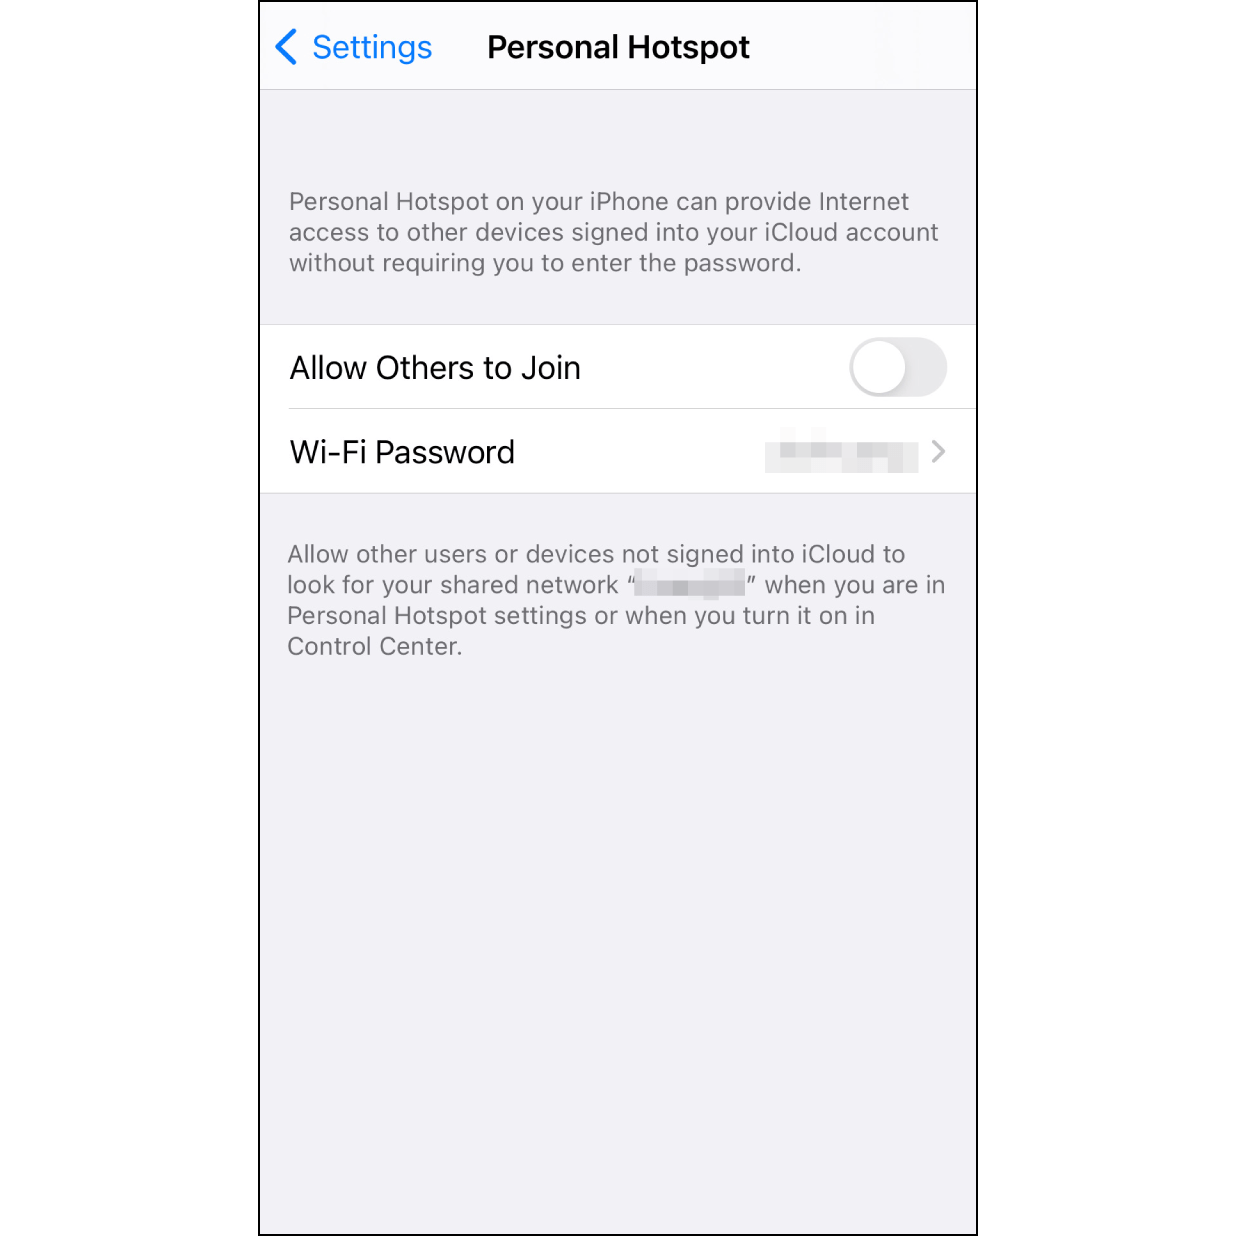 1. Set up iPhone HotspotNavigate to settings and set up iPhone hotspot name and password. Then, turn off the hotspot for now.(How to set up Personal Hotspot on iPhone)